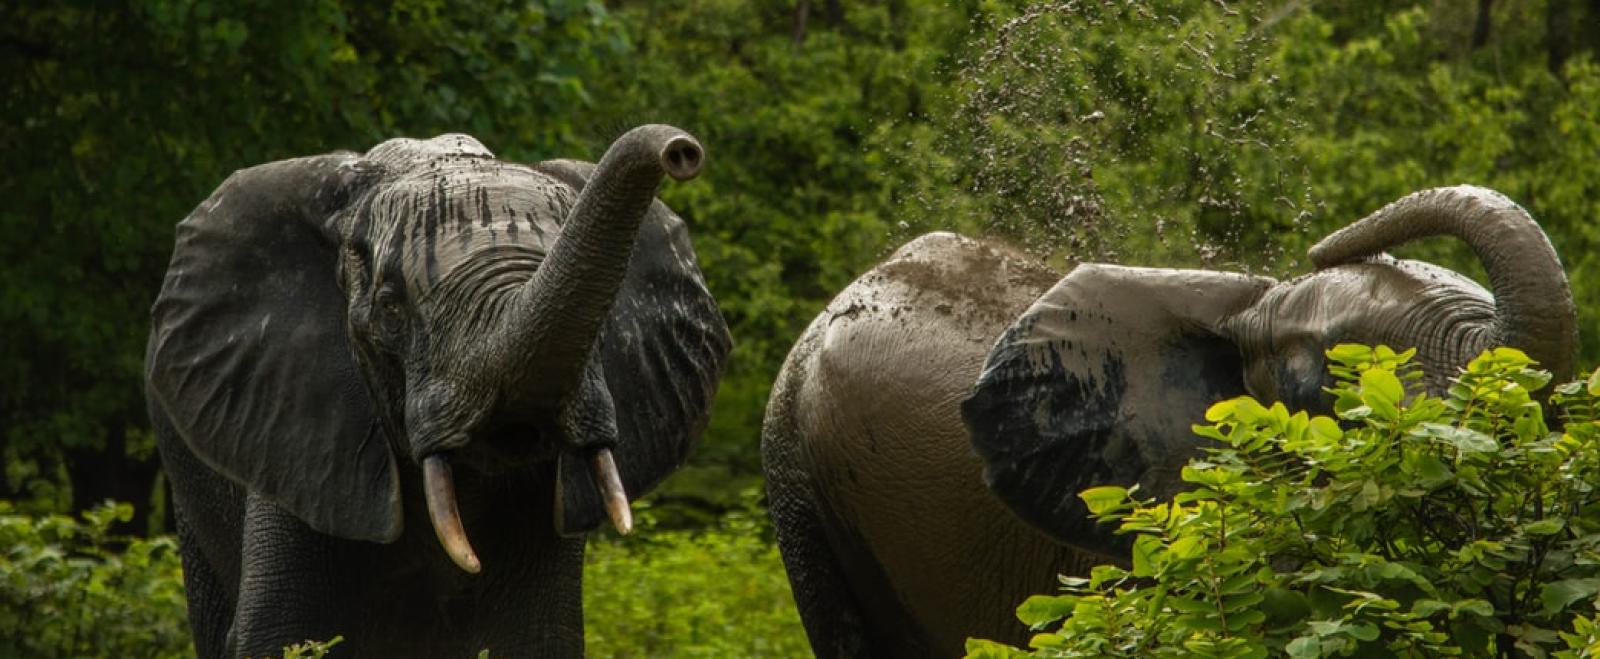 Elephants playing in a national park in Ghana